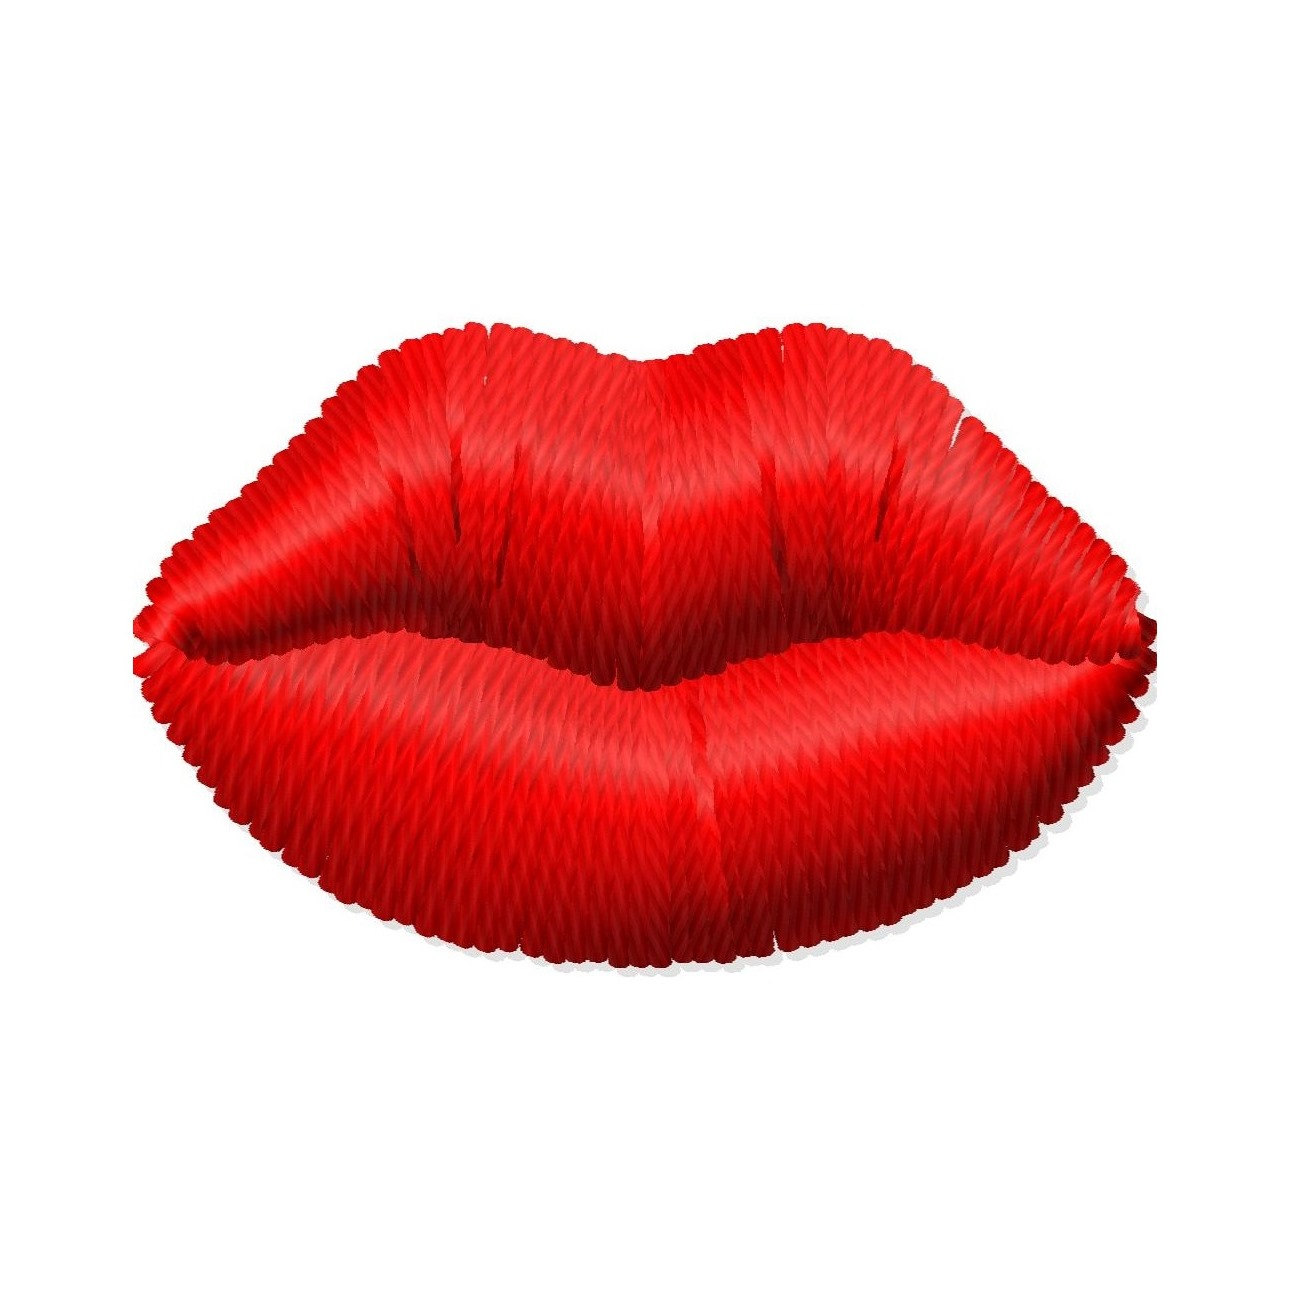 Free Lips Image Free Download Clipart